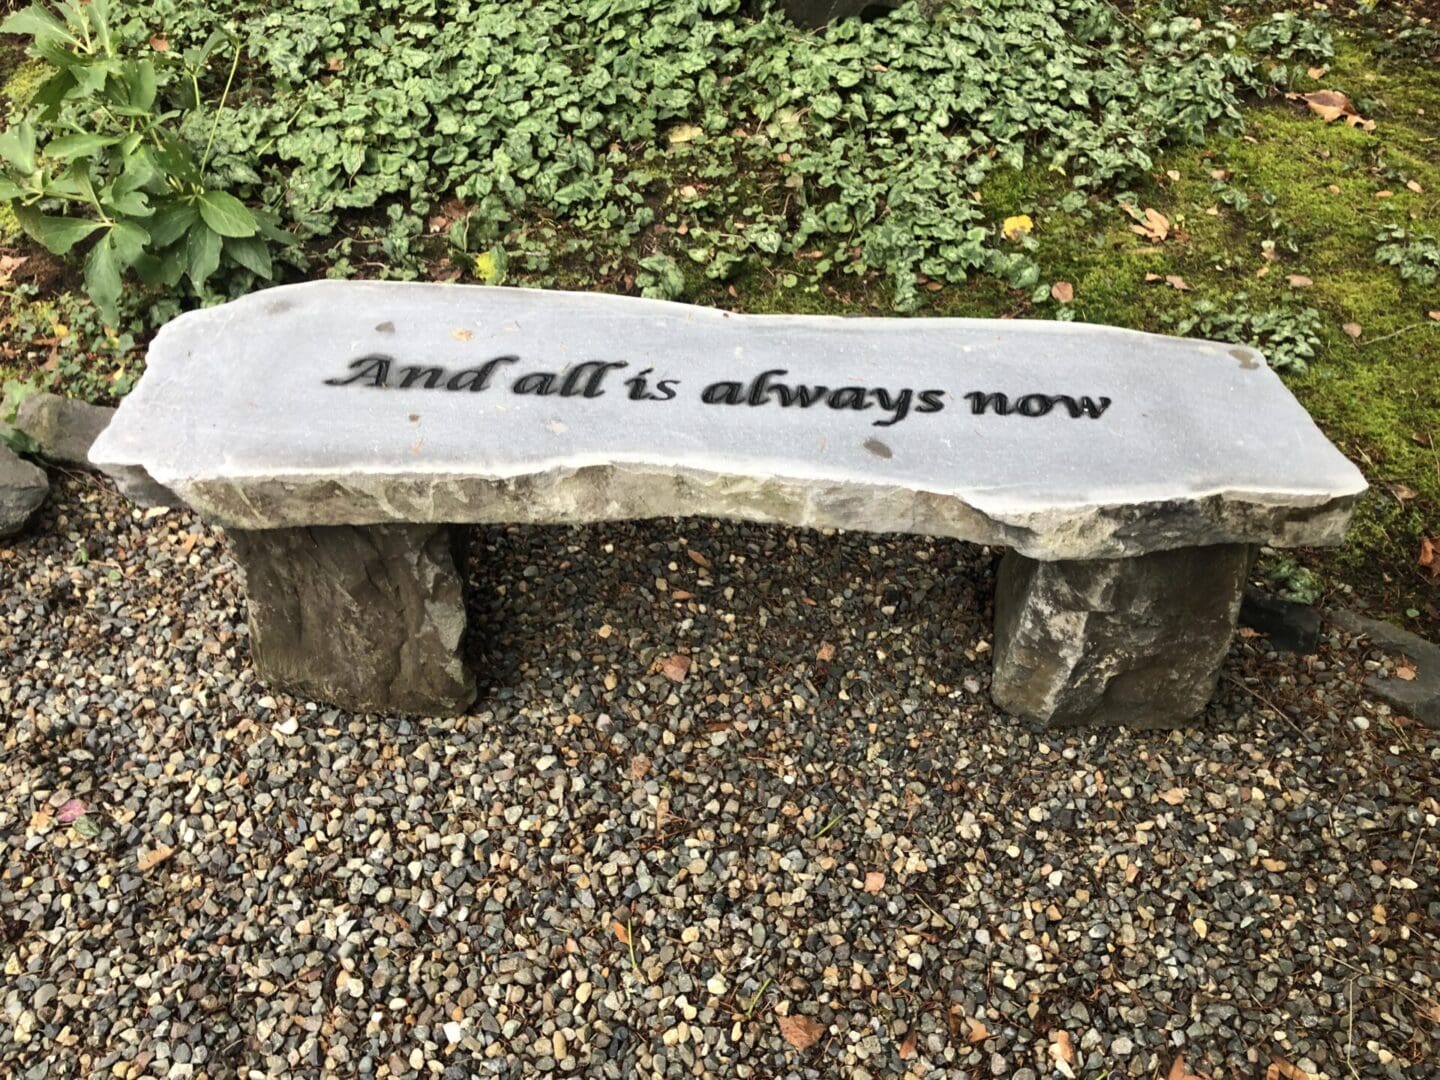 A stone bench with the words " and all is always now ".